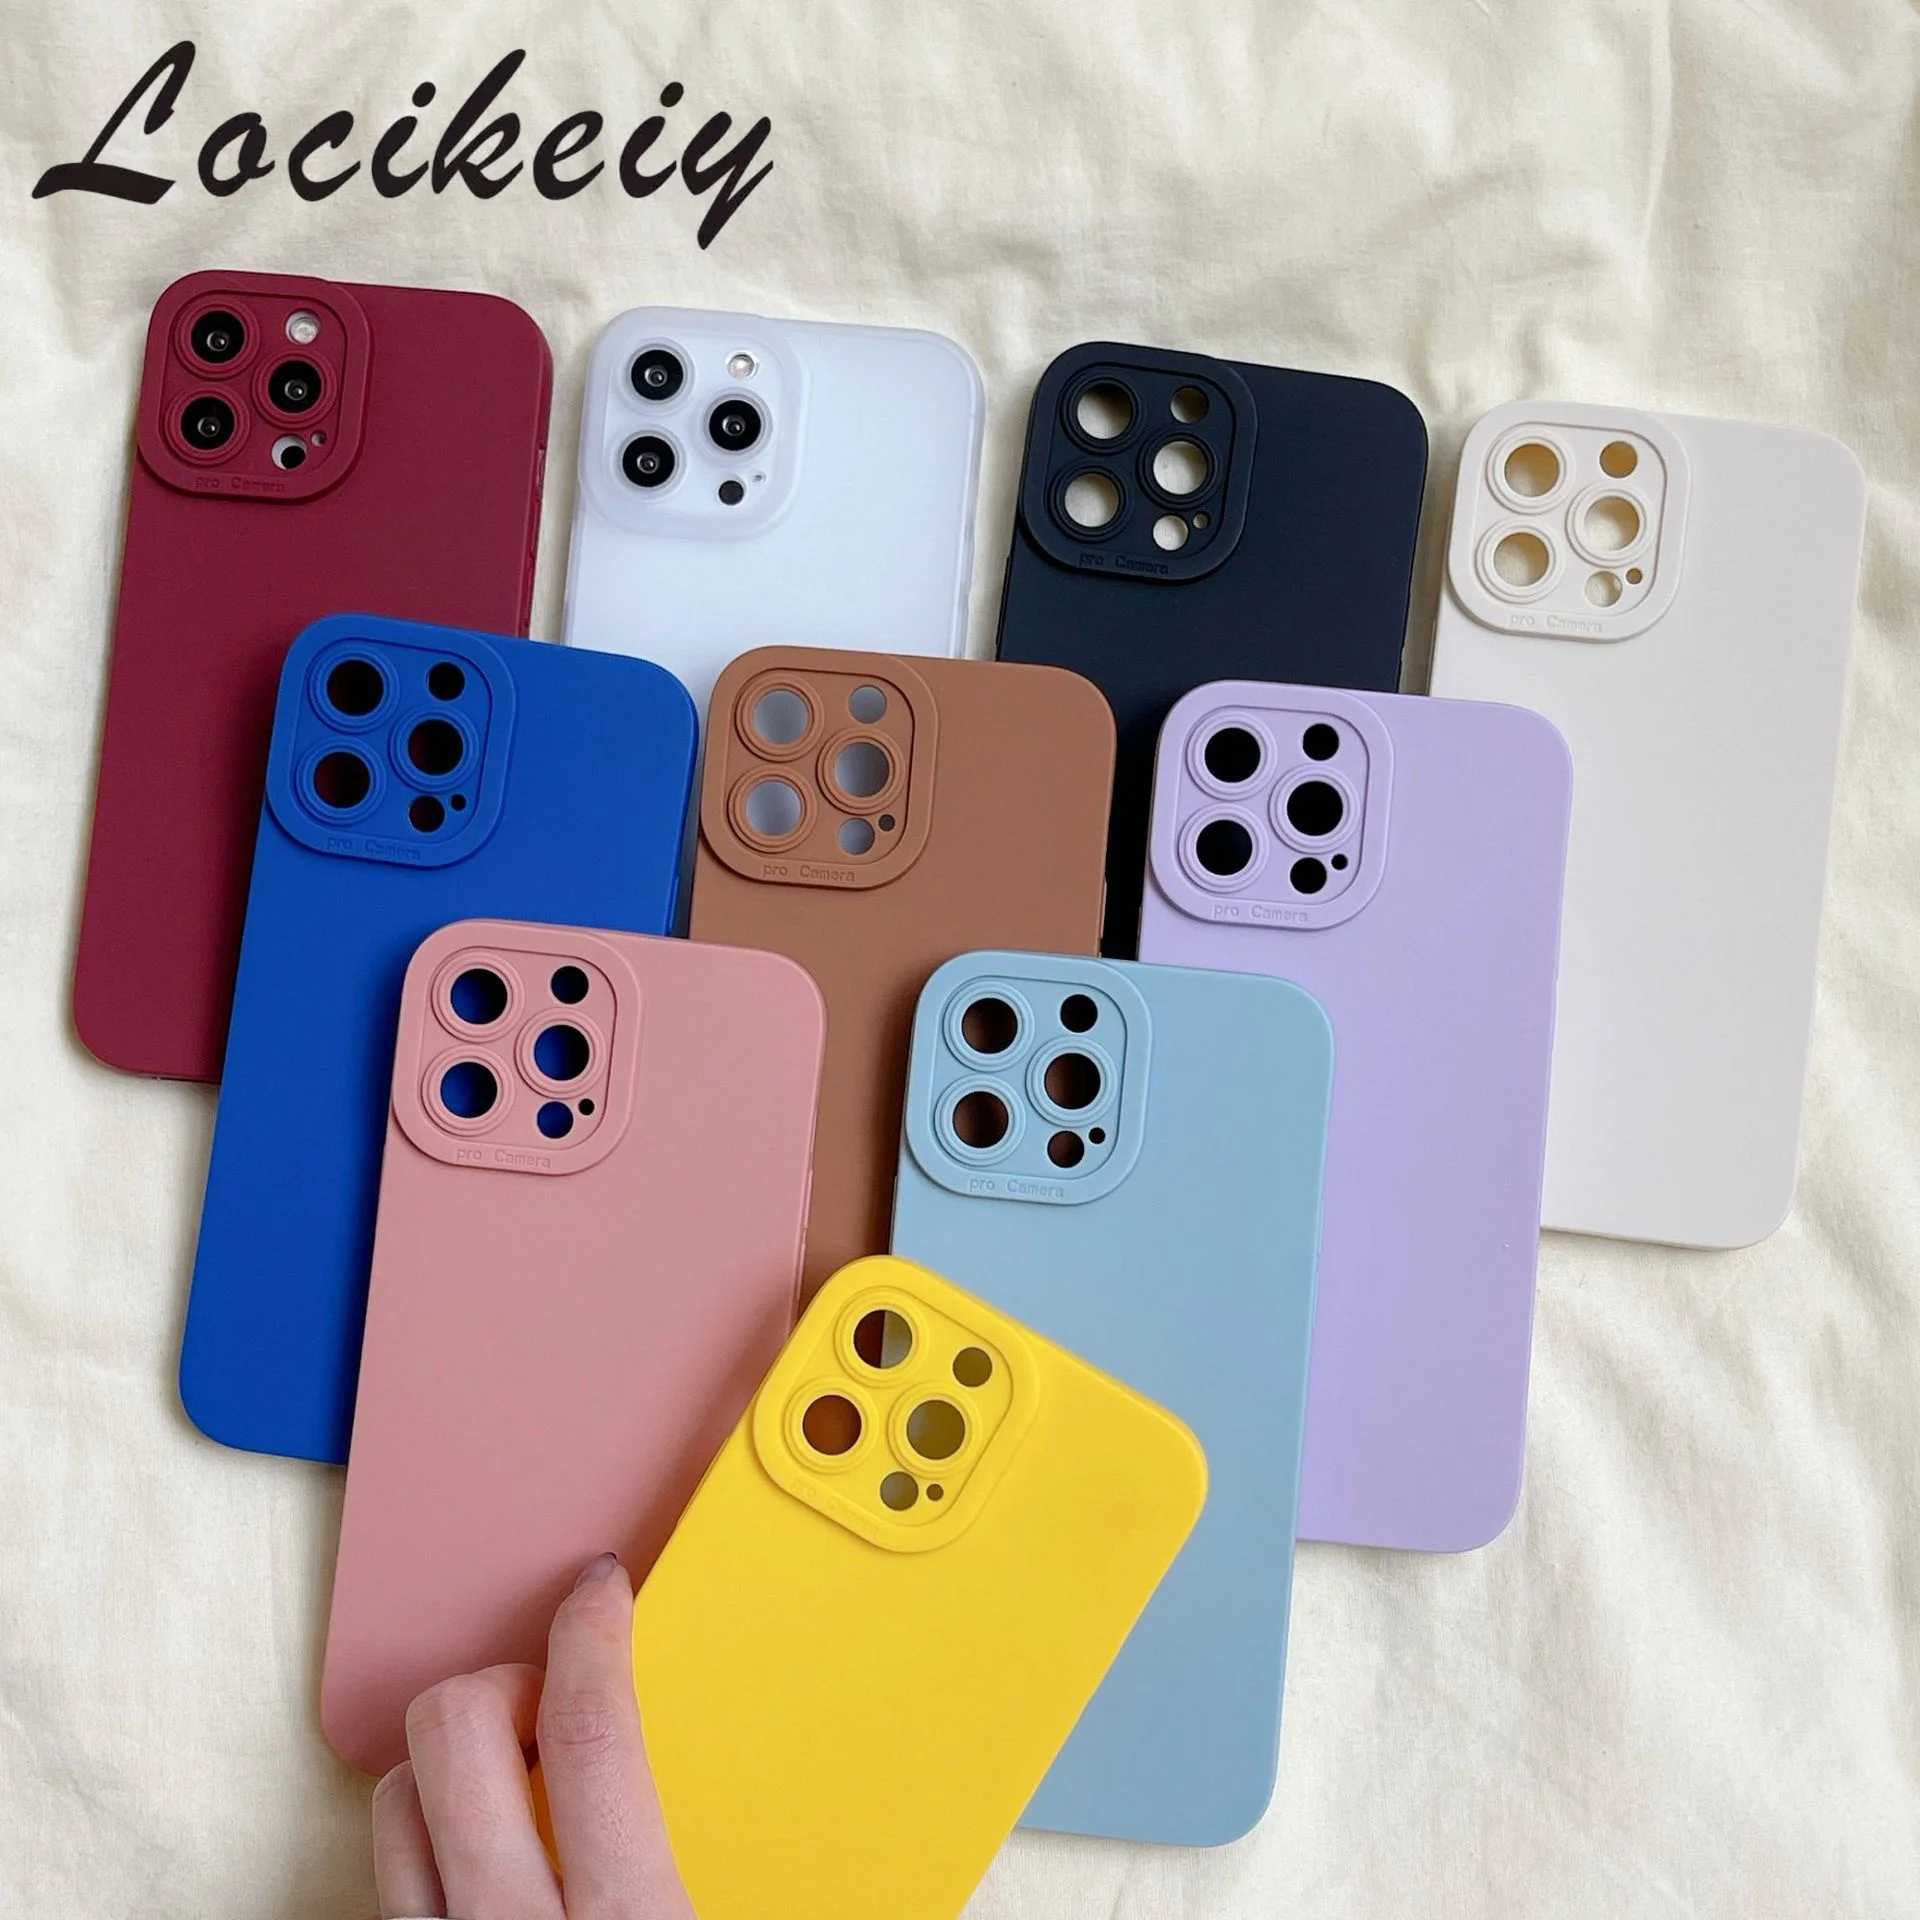 

Locikeiy New solid color suitable for iPhone14/13Pro Max 12 matte mobile phone case 11 Pro Max XS Max XR X 8/7/7/6s Plus